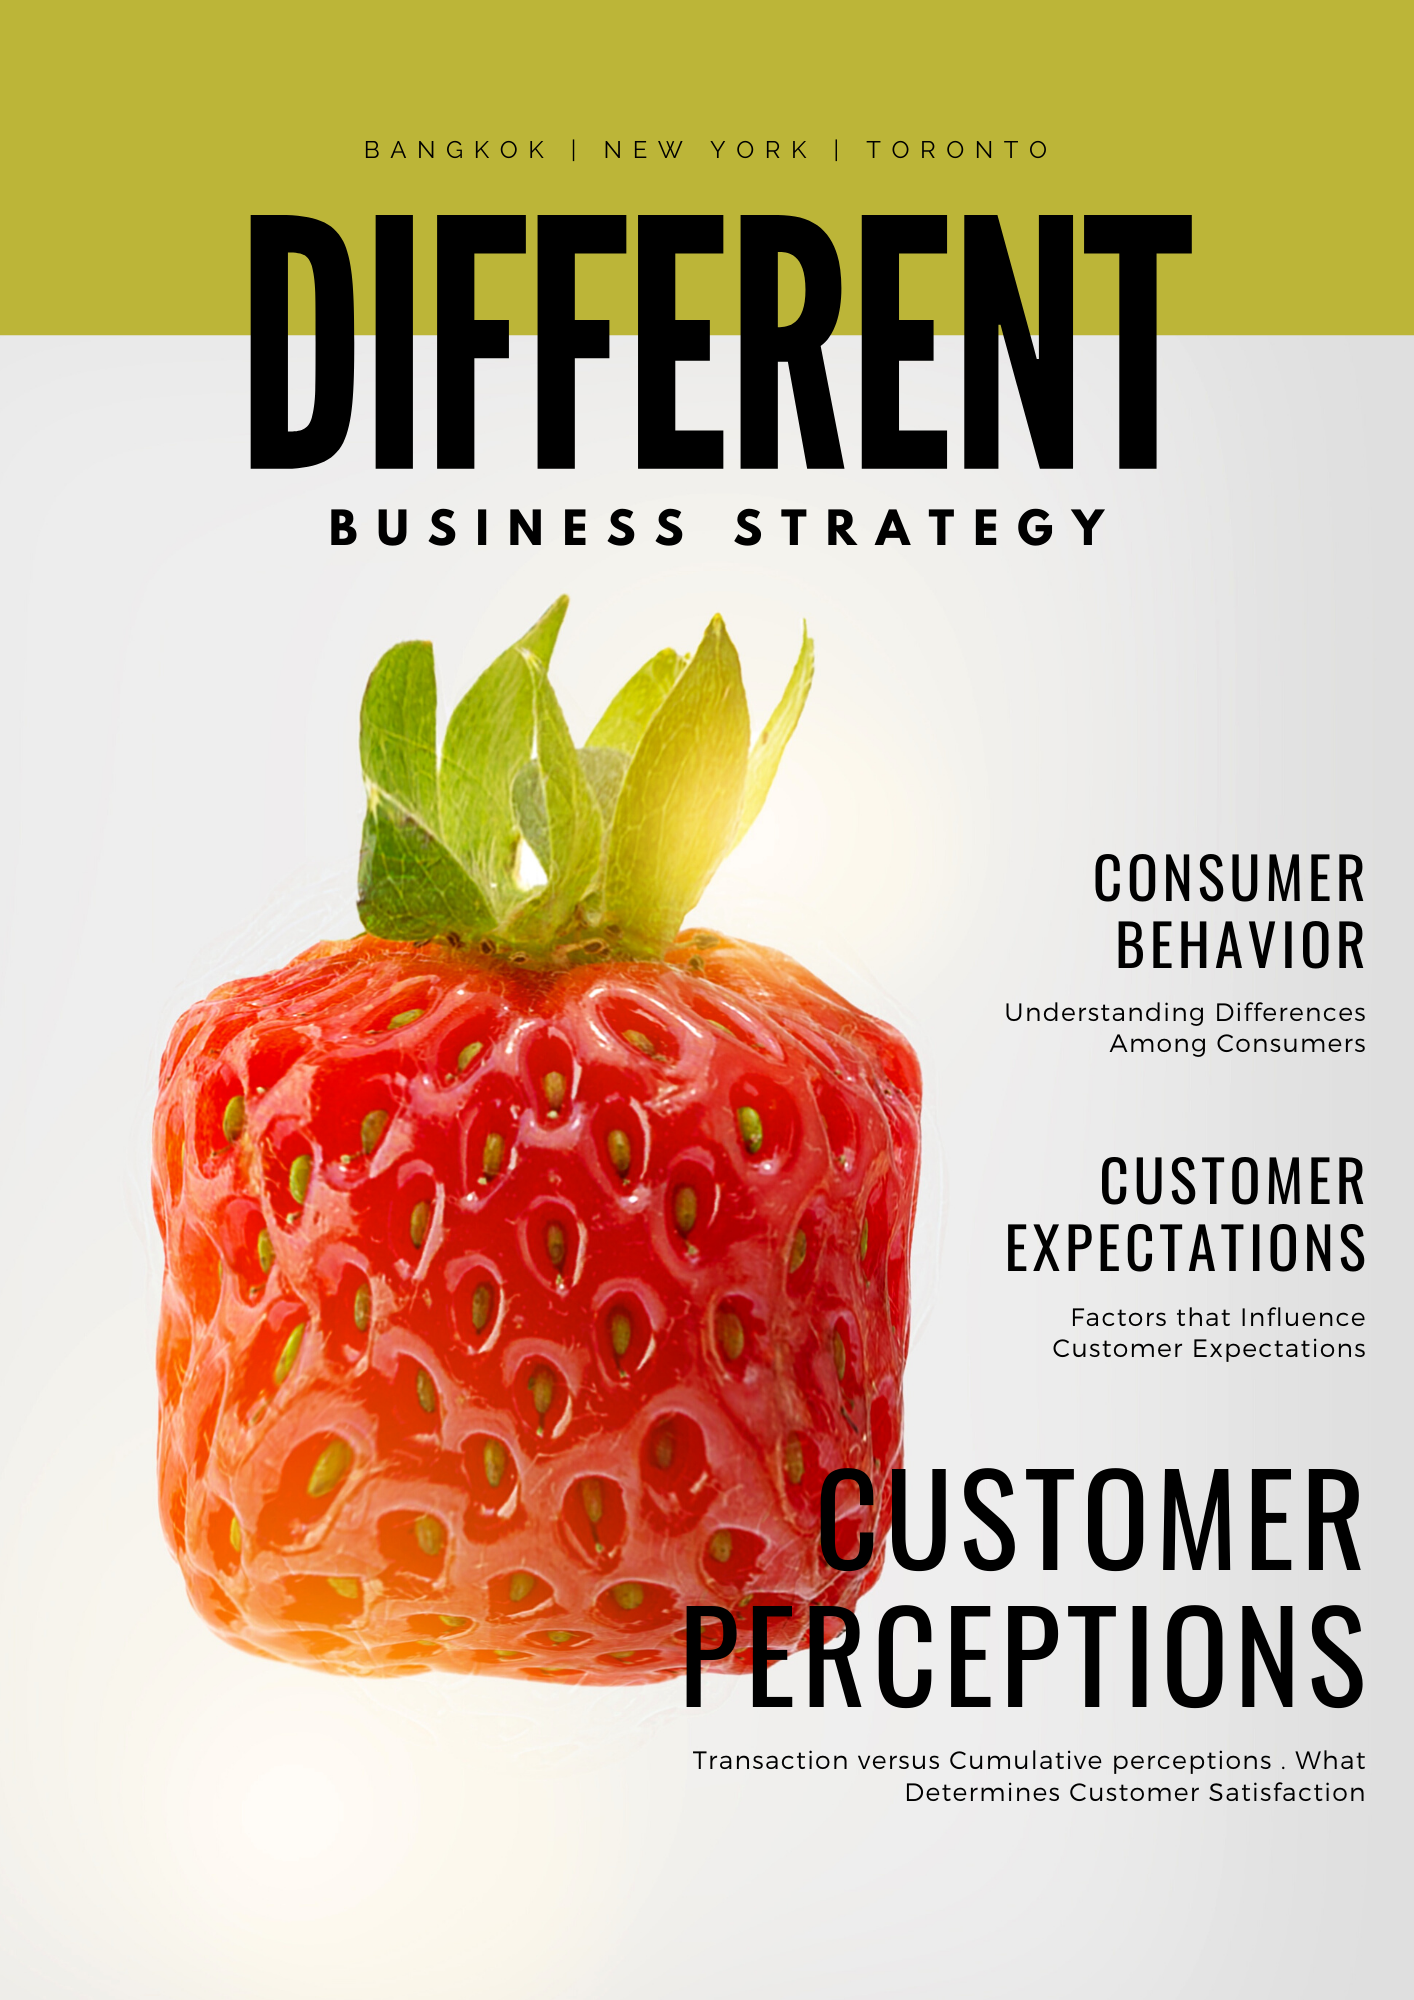 How to Differentiate Your Business Strategy